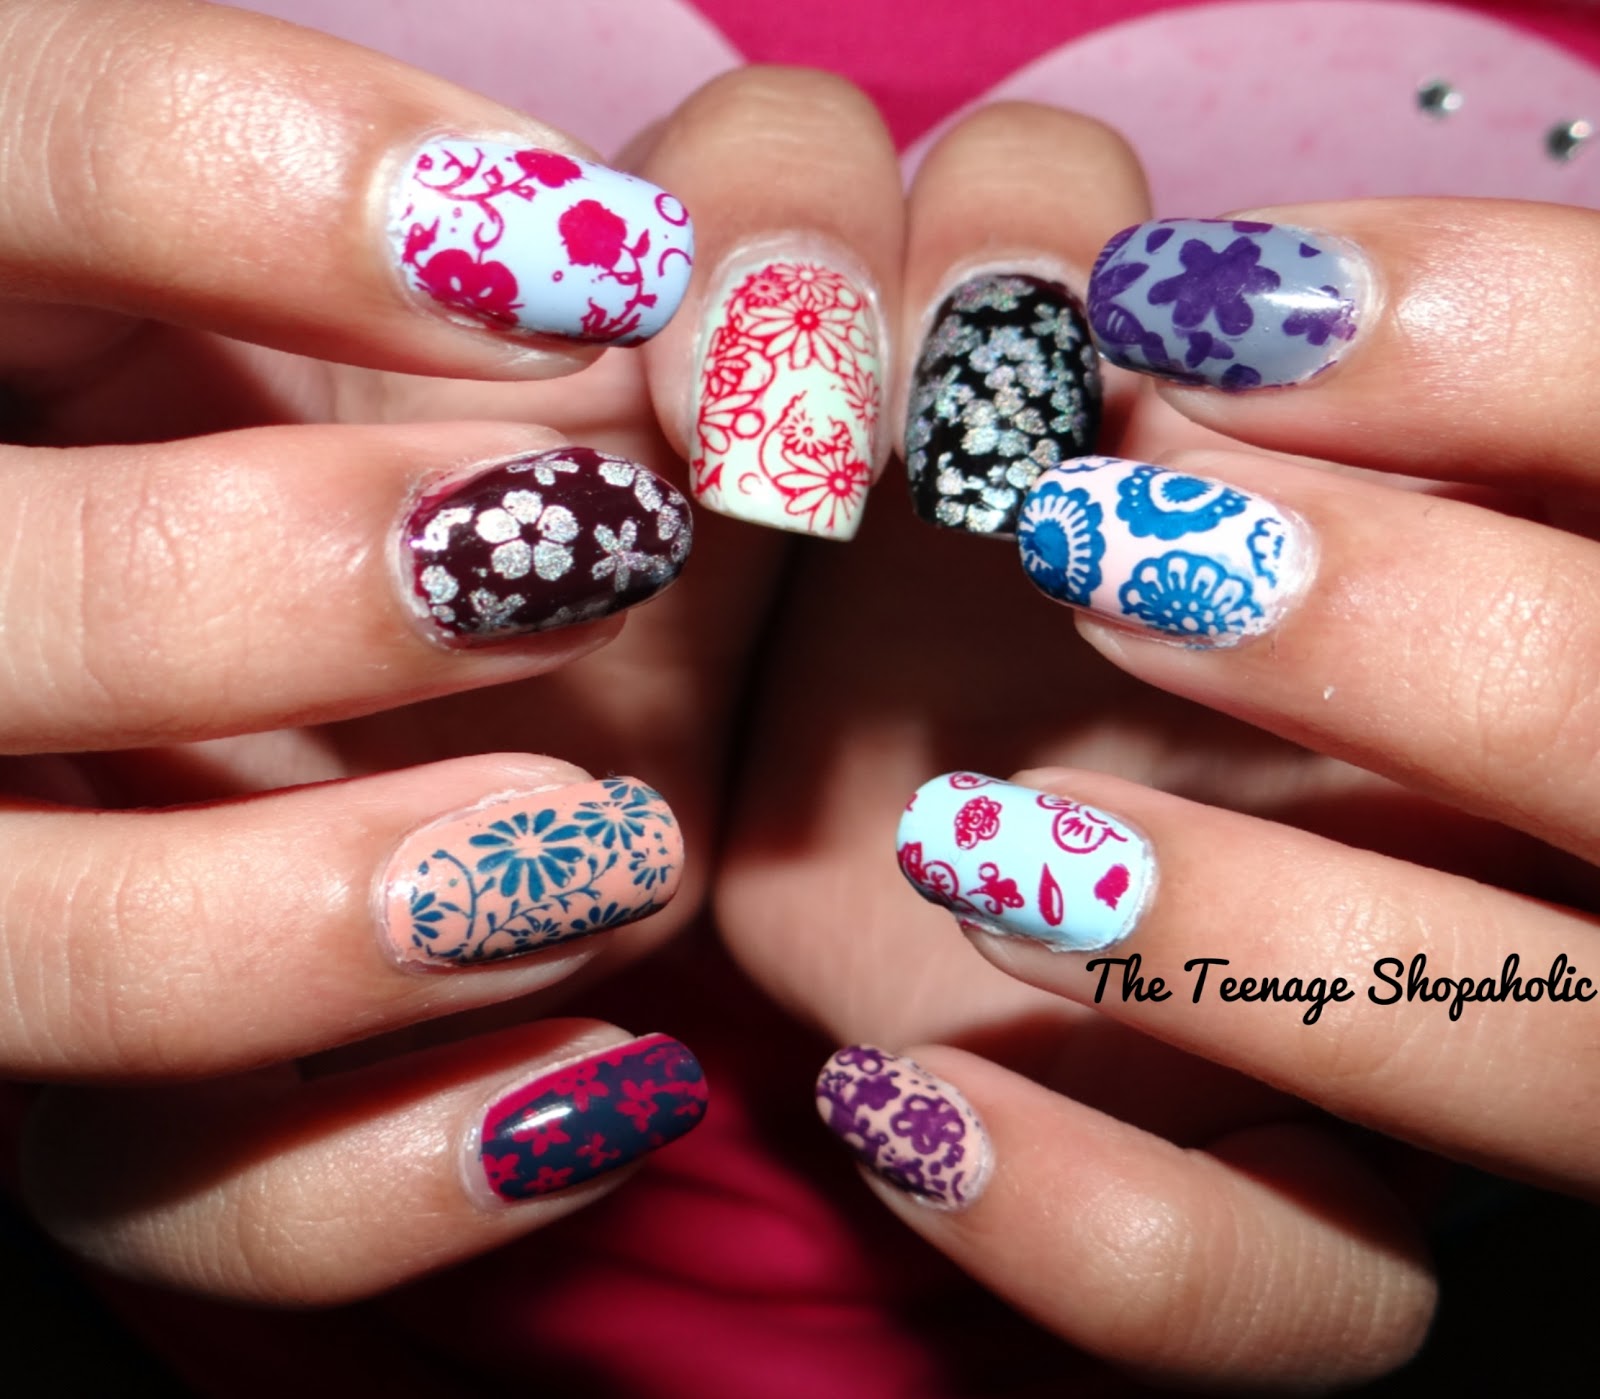 Diva's Diary: 31 Days of Nail Art Challenge - Day 14 - Flowers